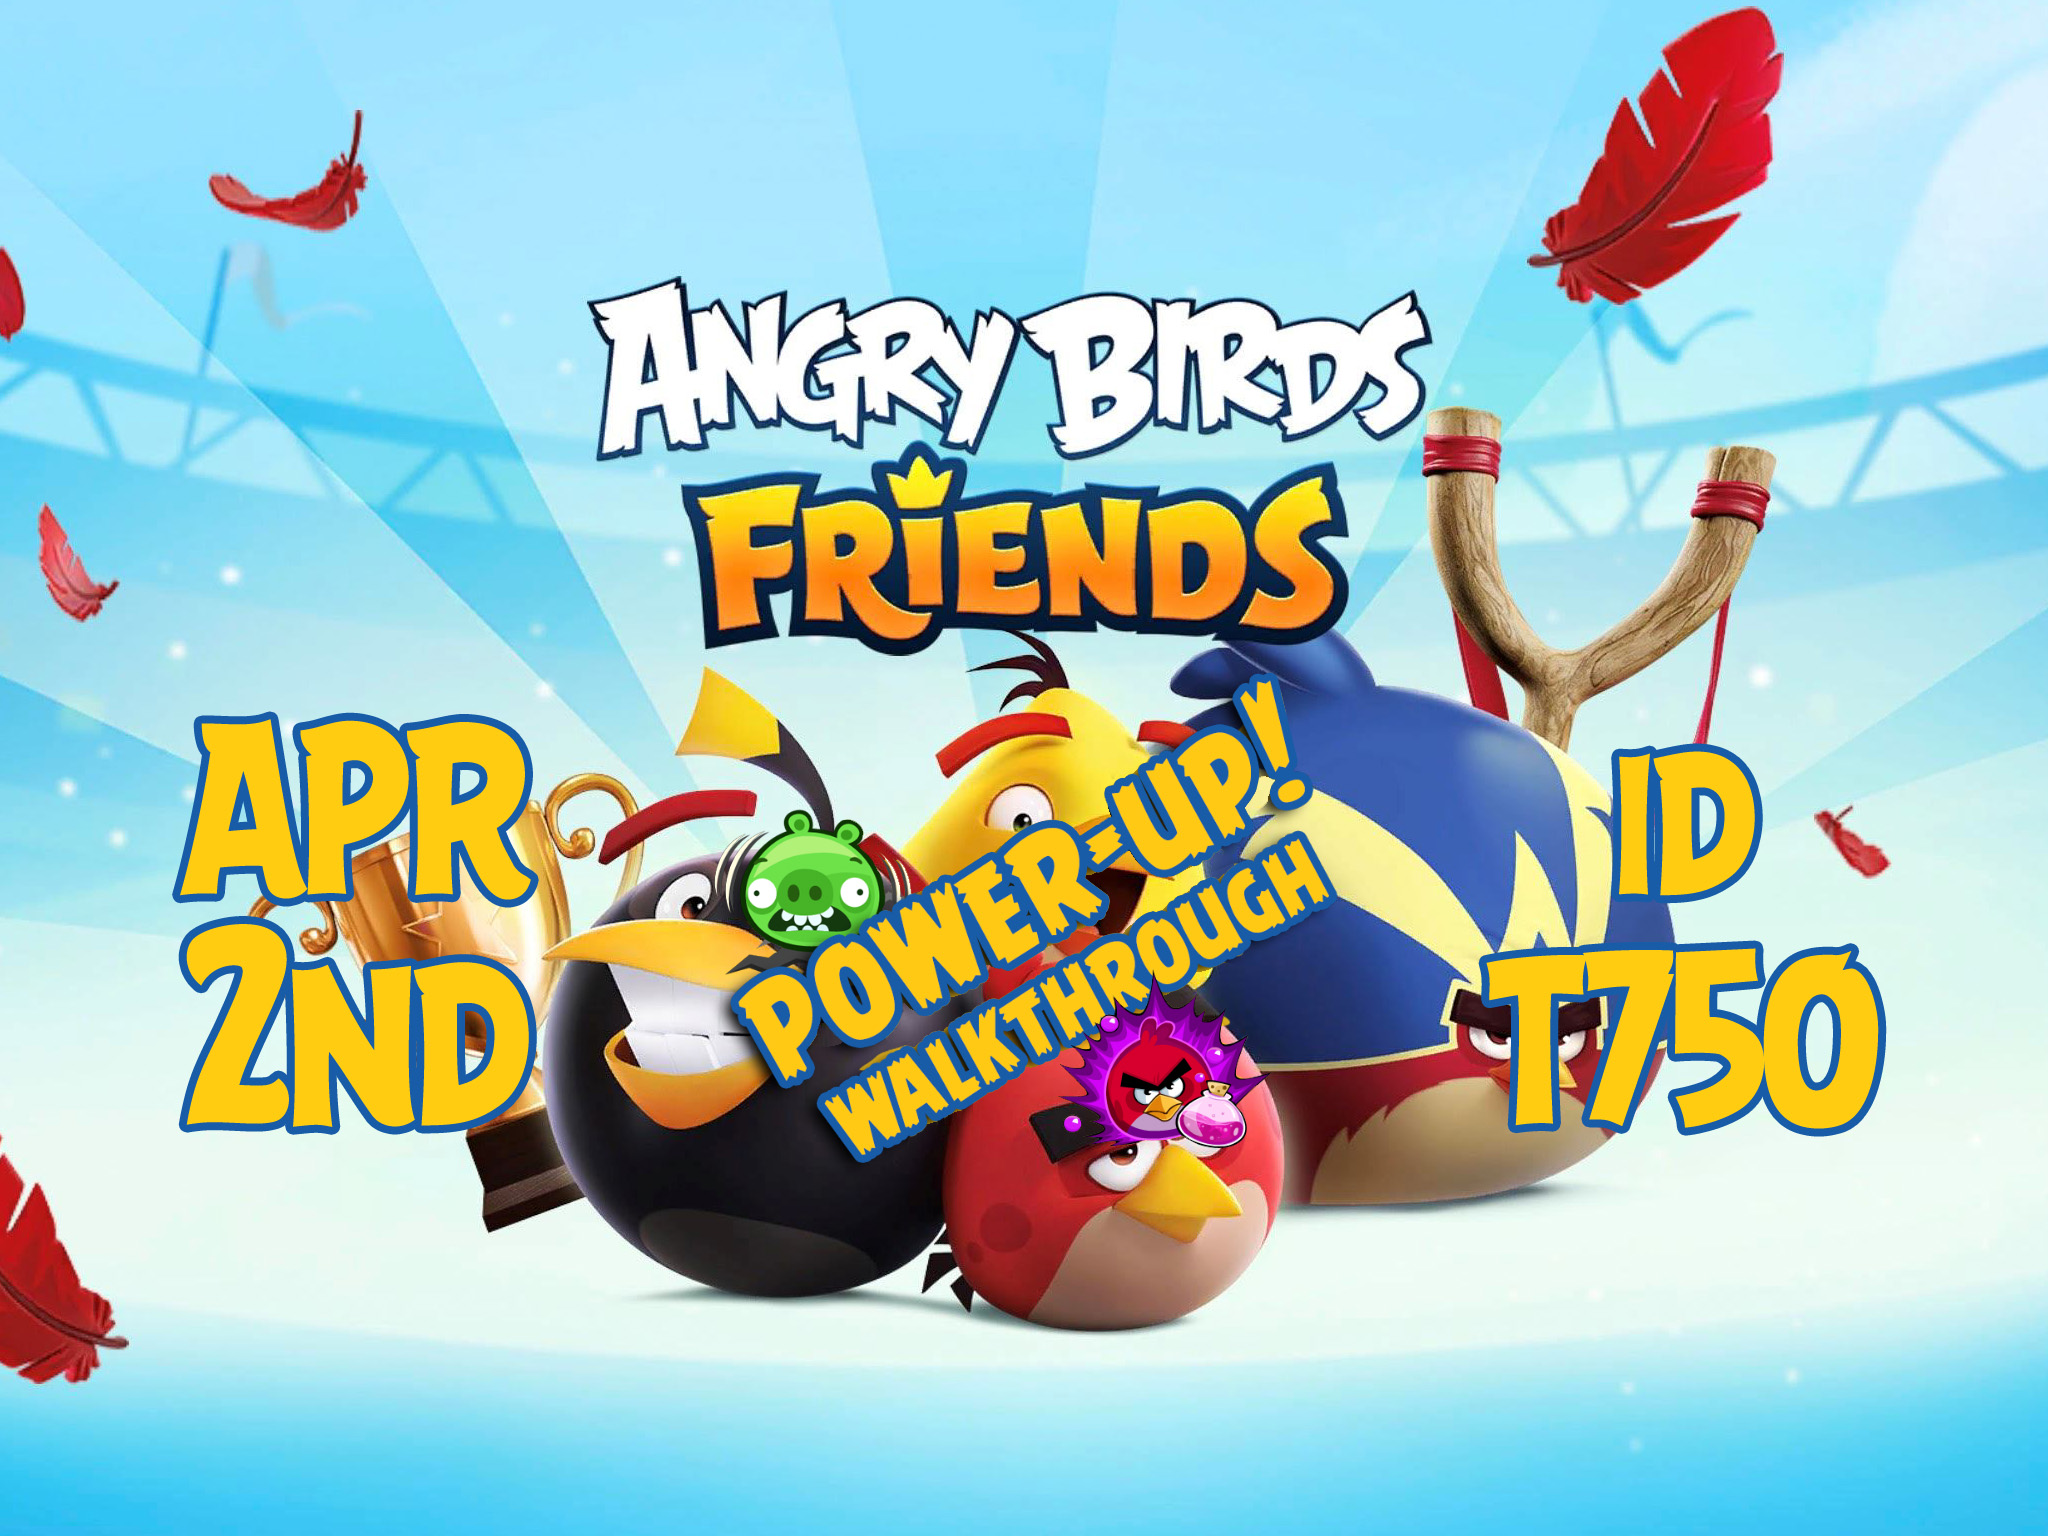 Angry-Birds-Friends-Tournament-T750-Feature-Image-PU